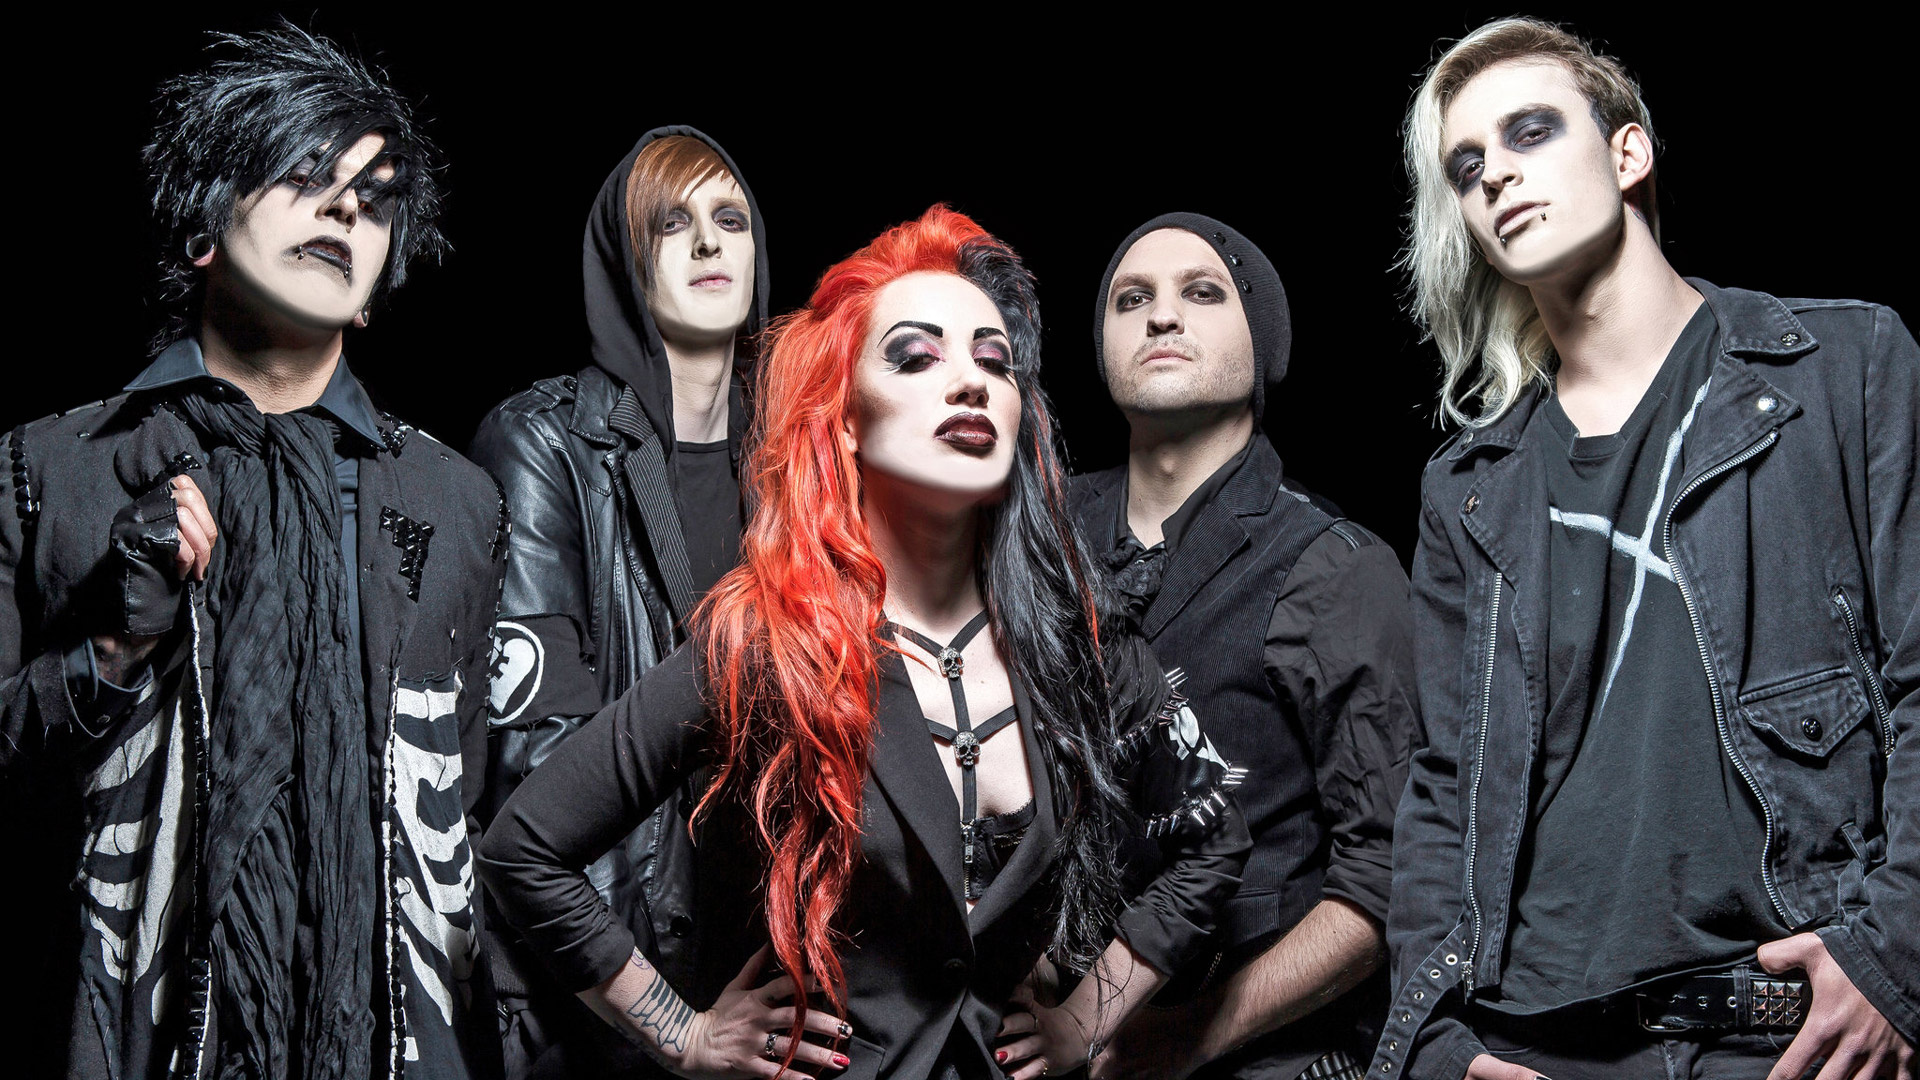 New Years Day, Ashley Costello, Ladies of metal inspiration, New Years Day band, 1920x1080 Full HD Desktop